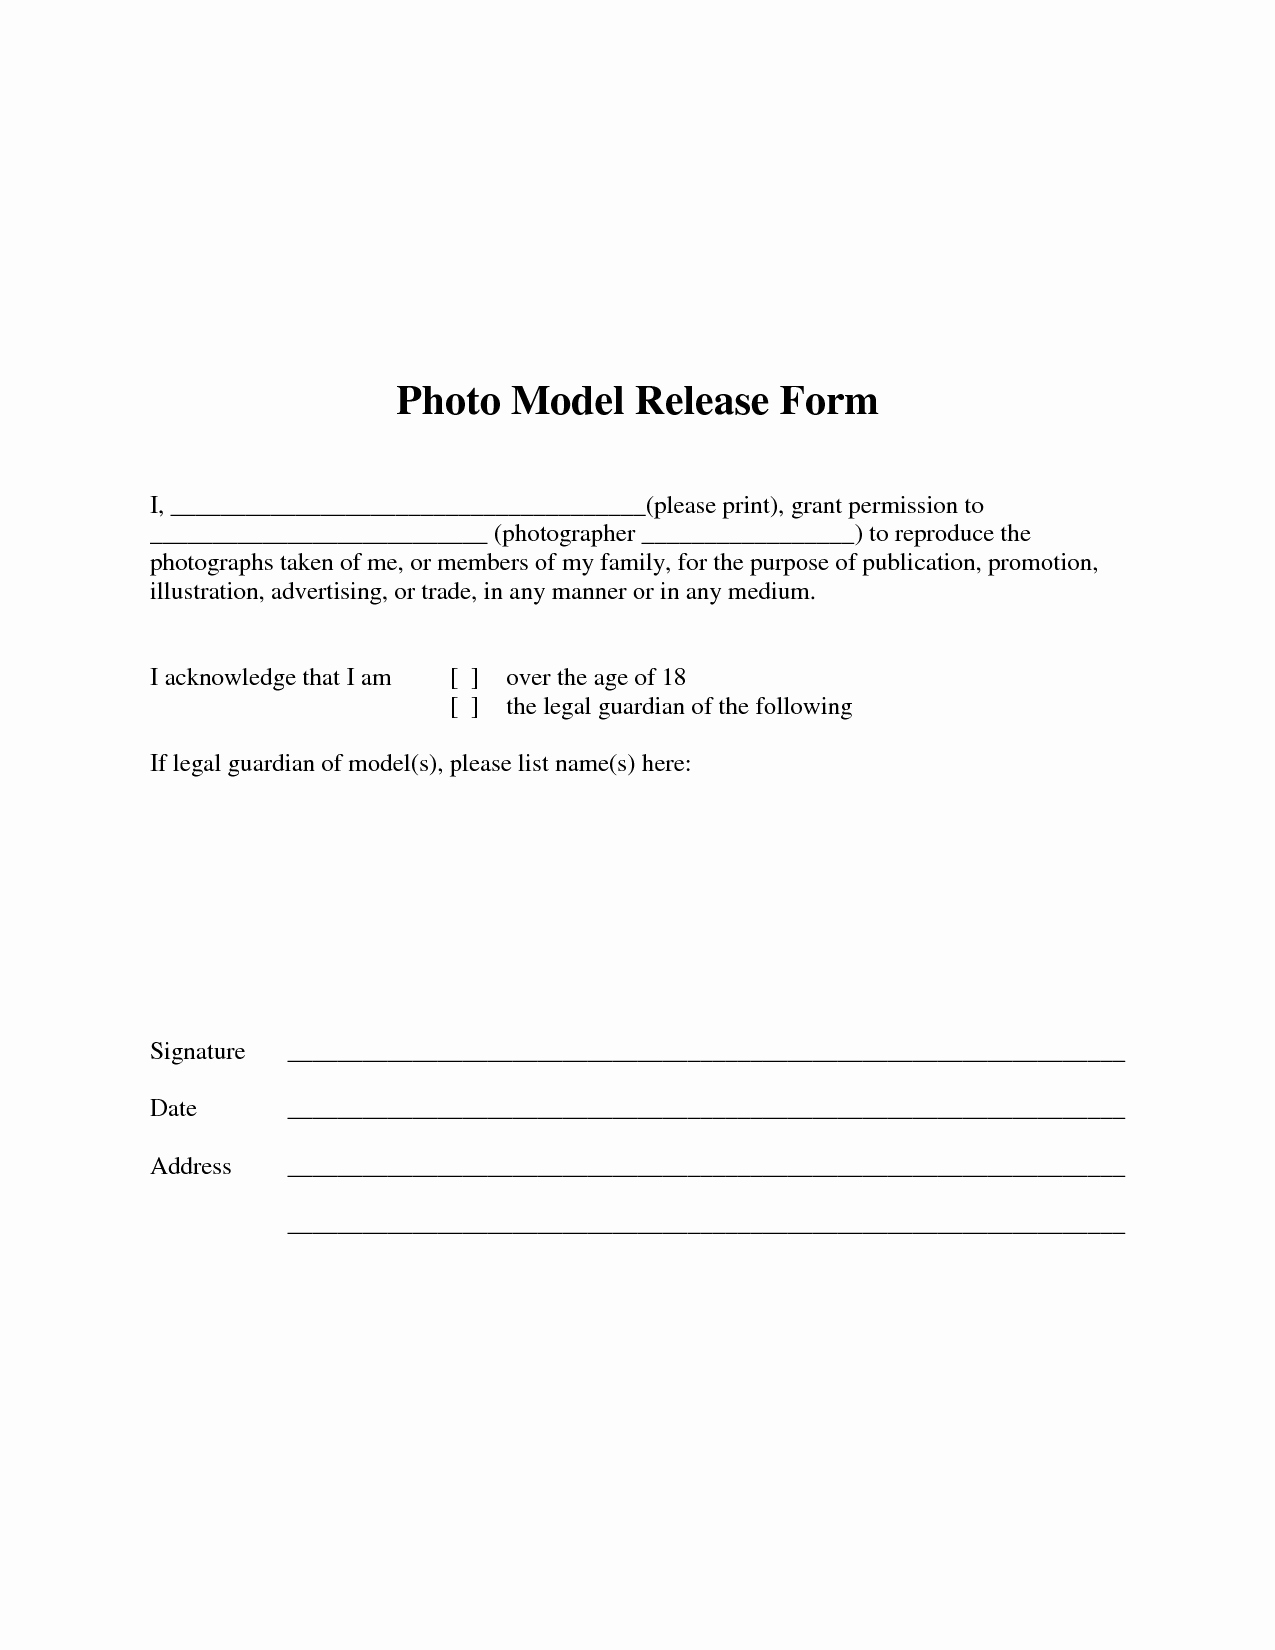 Free Photo Release form Lovely Free Photographer Release form